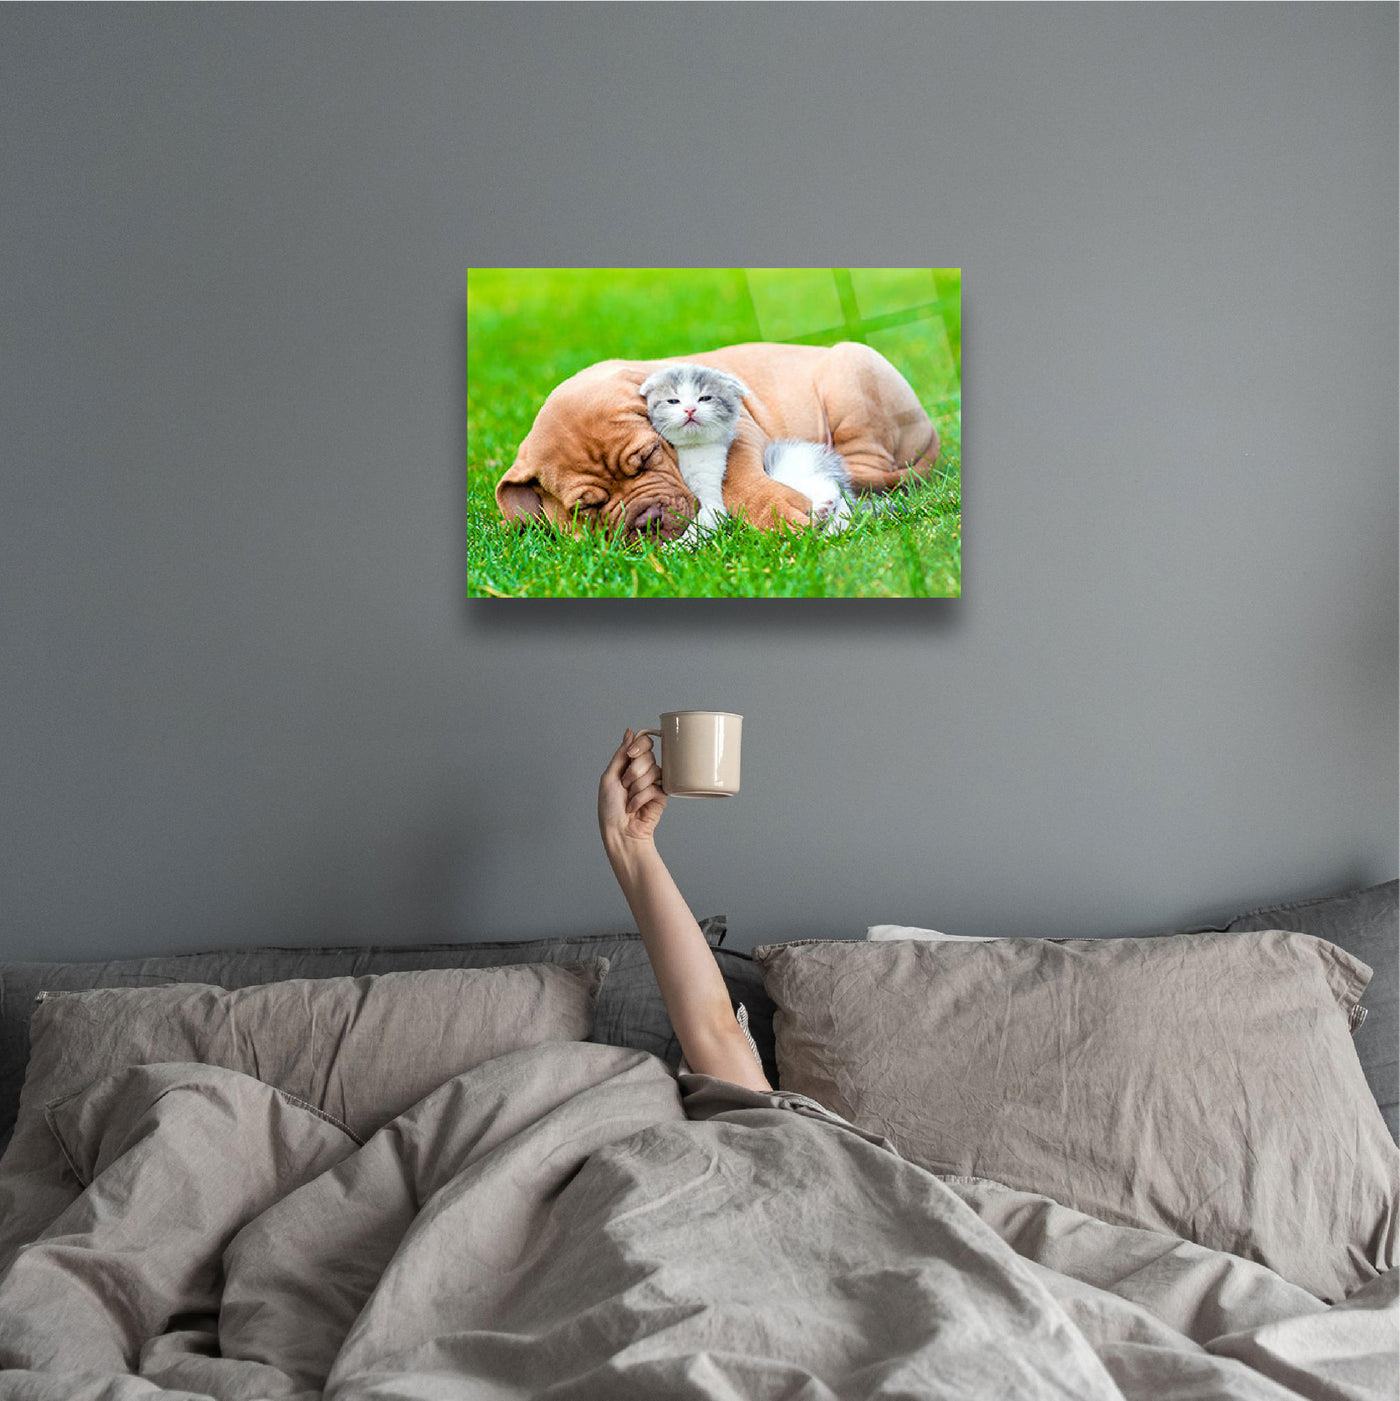 Dog and Cat Wall Decor